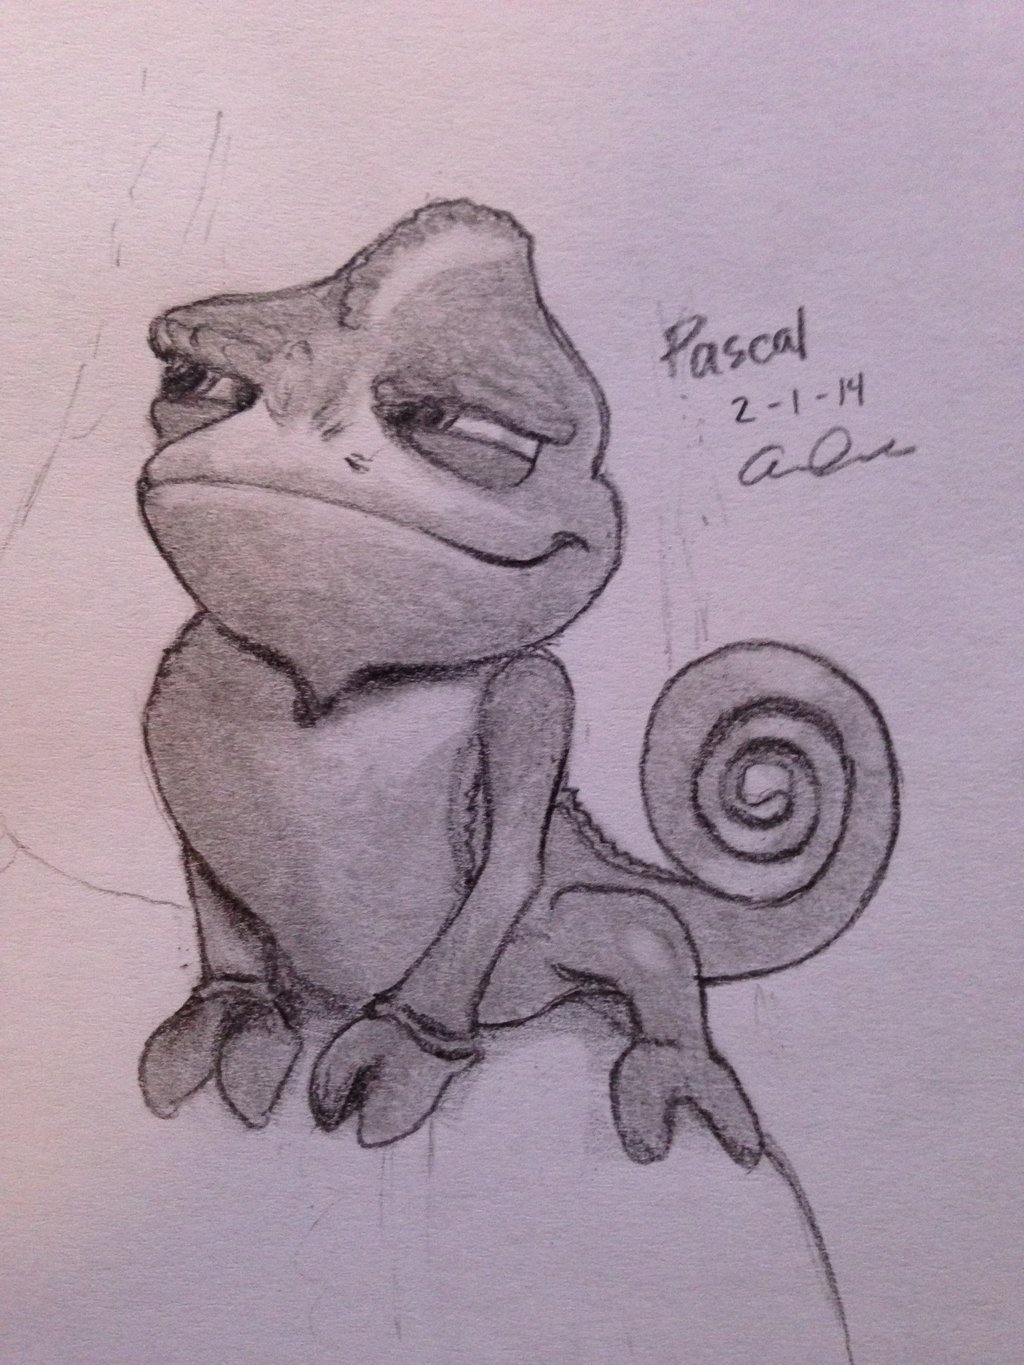 1024x1365 how to draw pascal from tangled - Pascal Tangled Drawing.